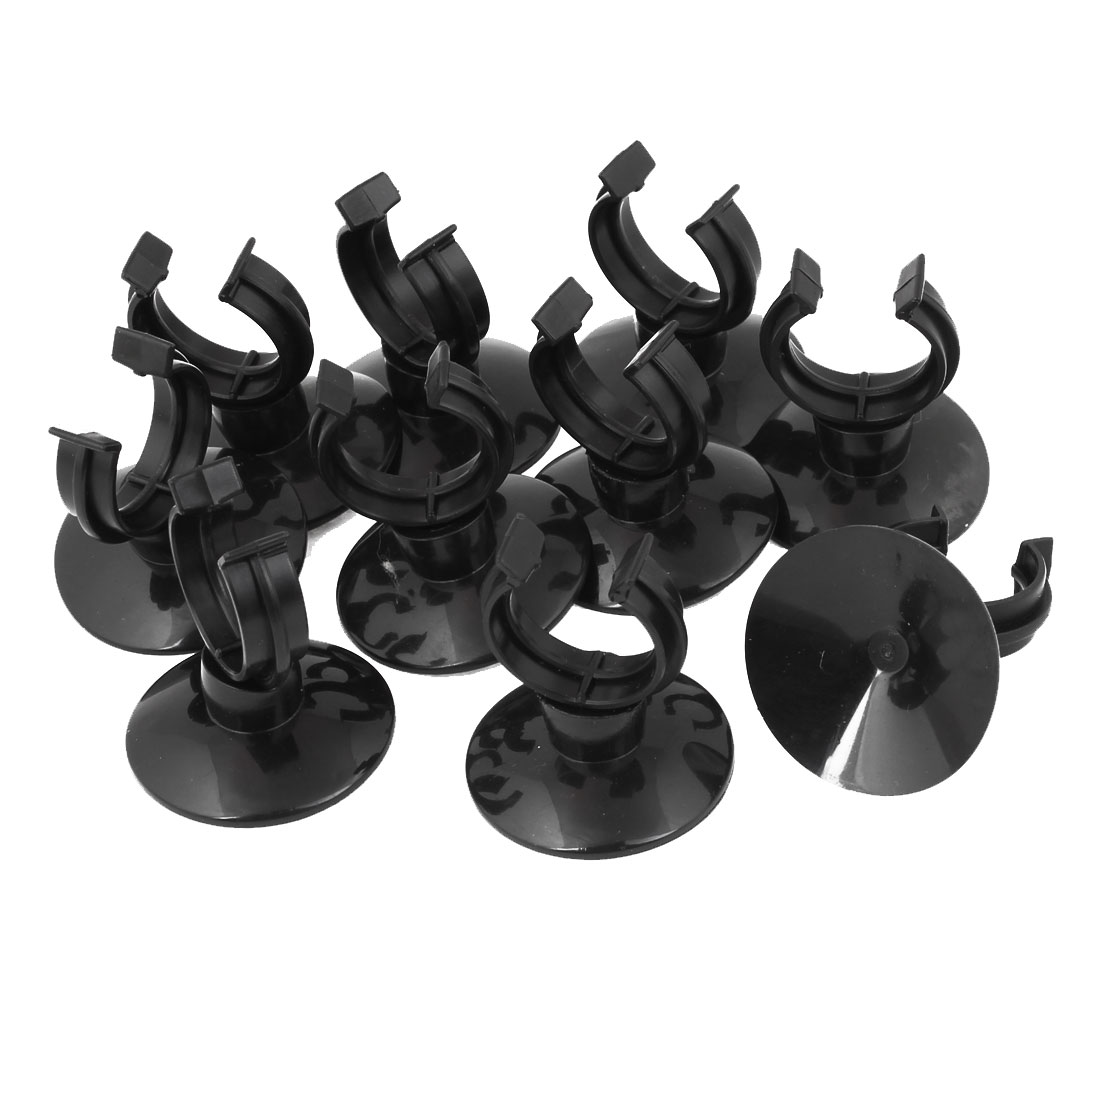 Unique Bargains 10 x Silicone Suction Cup Holder 25mm Dia Tube Airline for Fish Tank